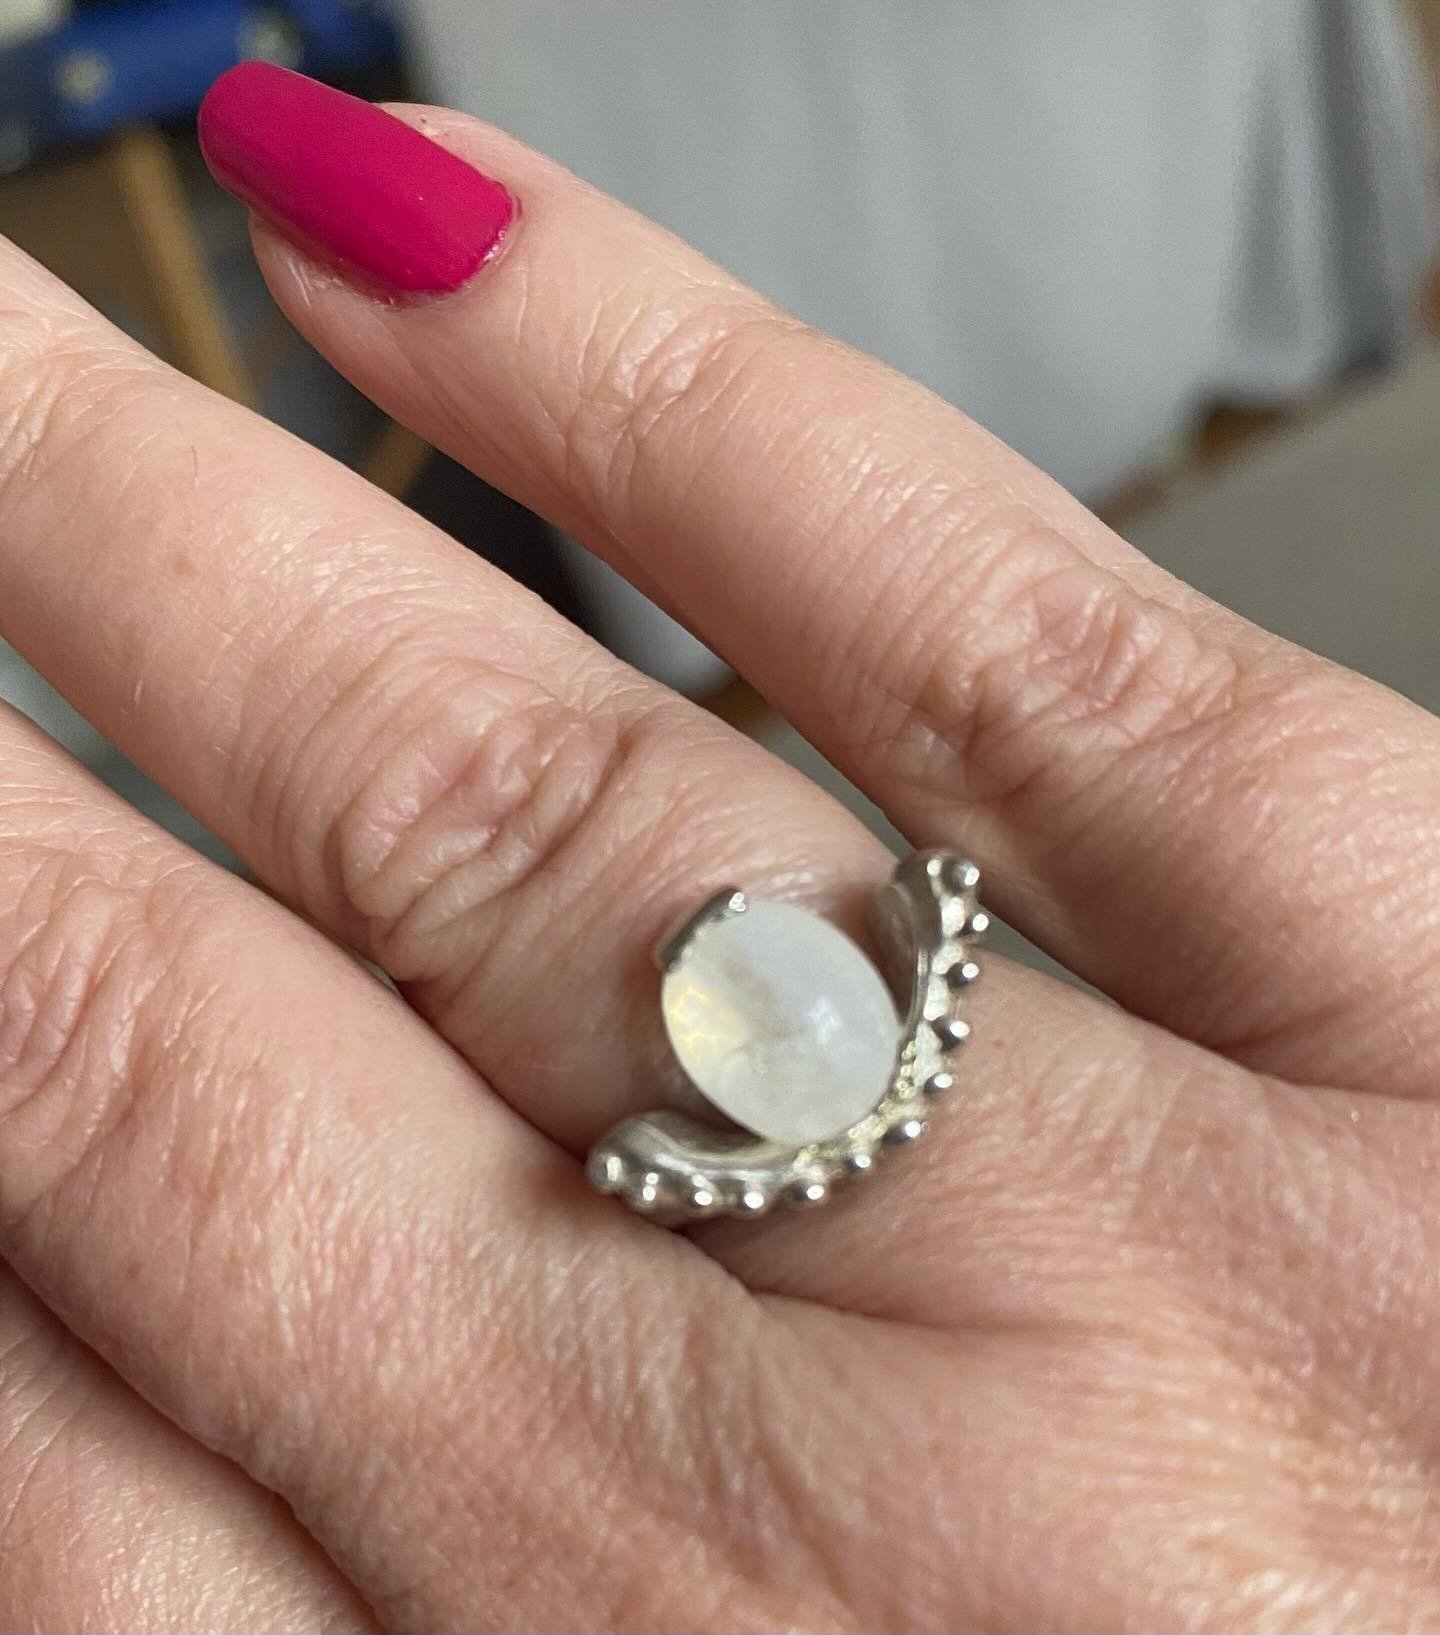 Absolutely stunning moonstone arrived today from @alexandra_rae_jewellery  to go with the labradorite I treated myself to last year. Alex, you&rsquo;re so talented. Thank you for sharing your talent 💍 and for your stunning jewellery ❤️
#irishbusines